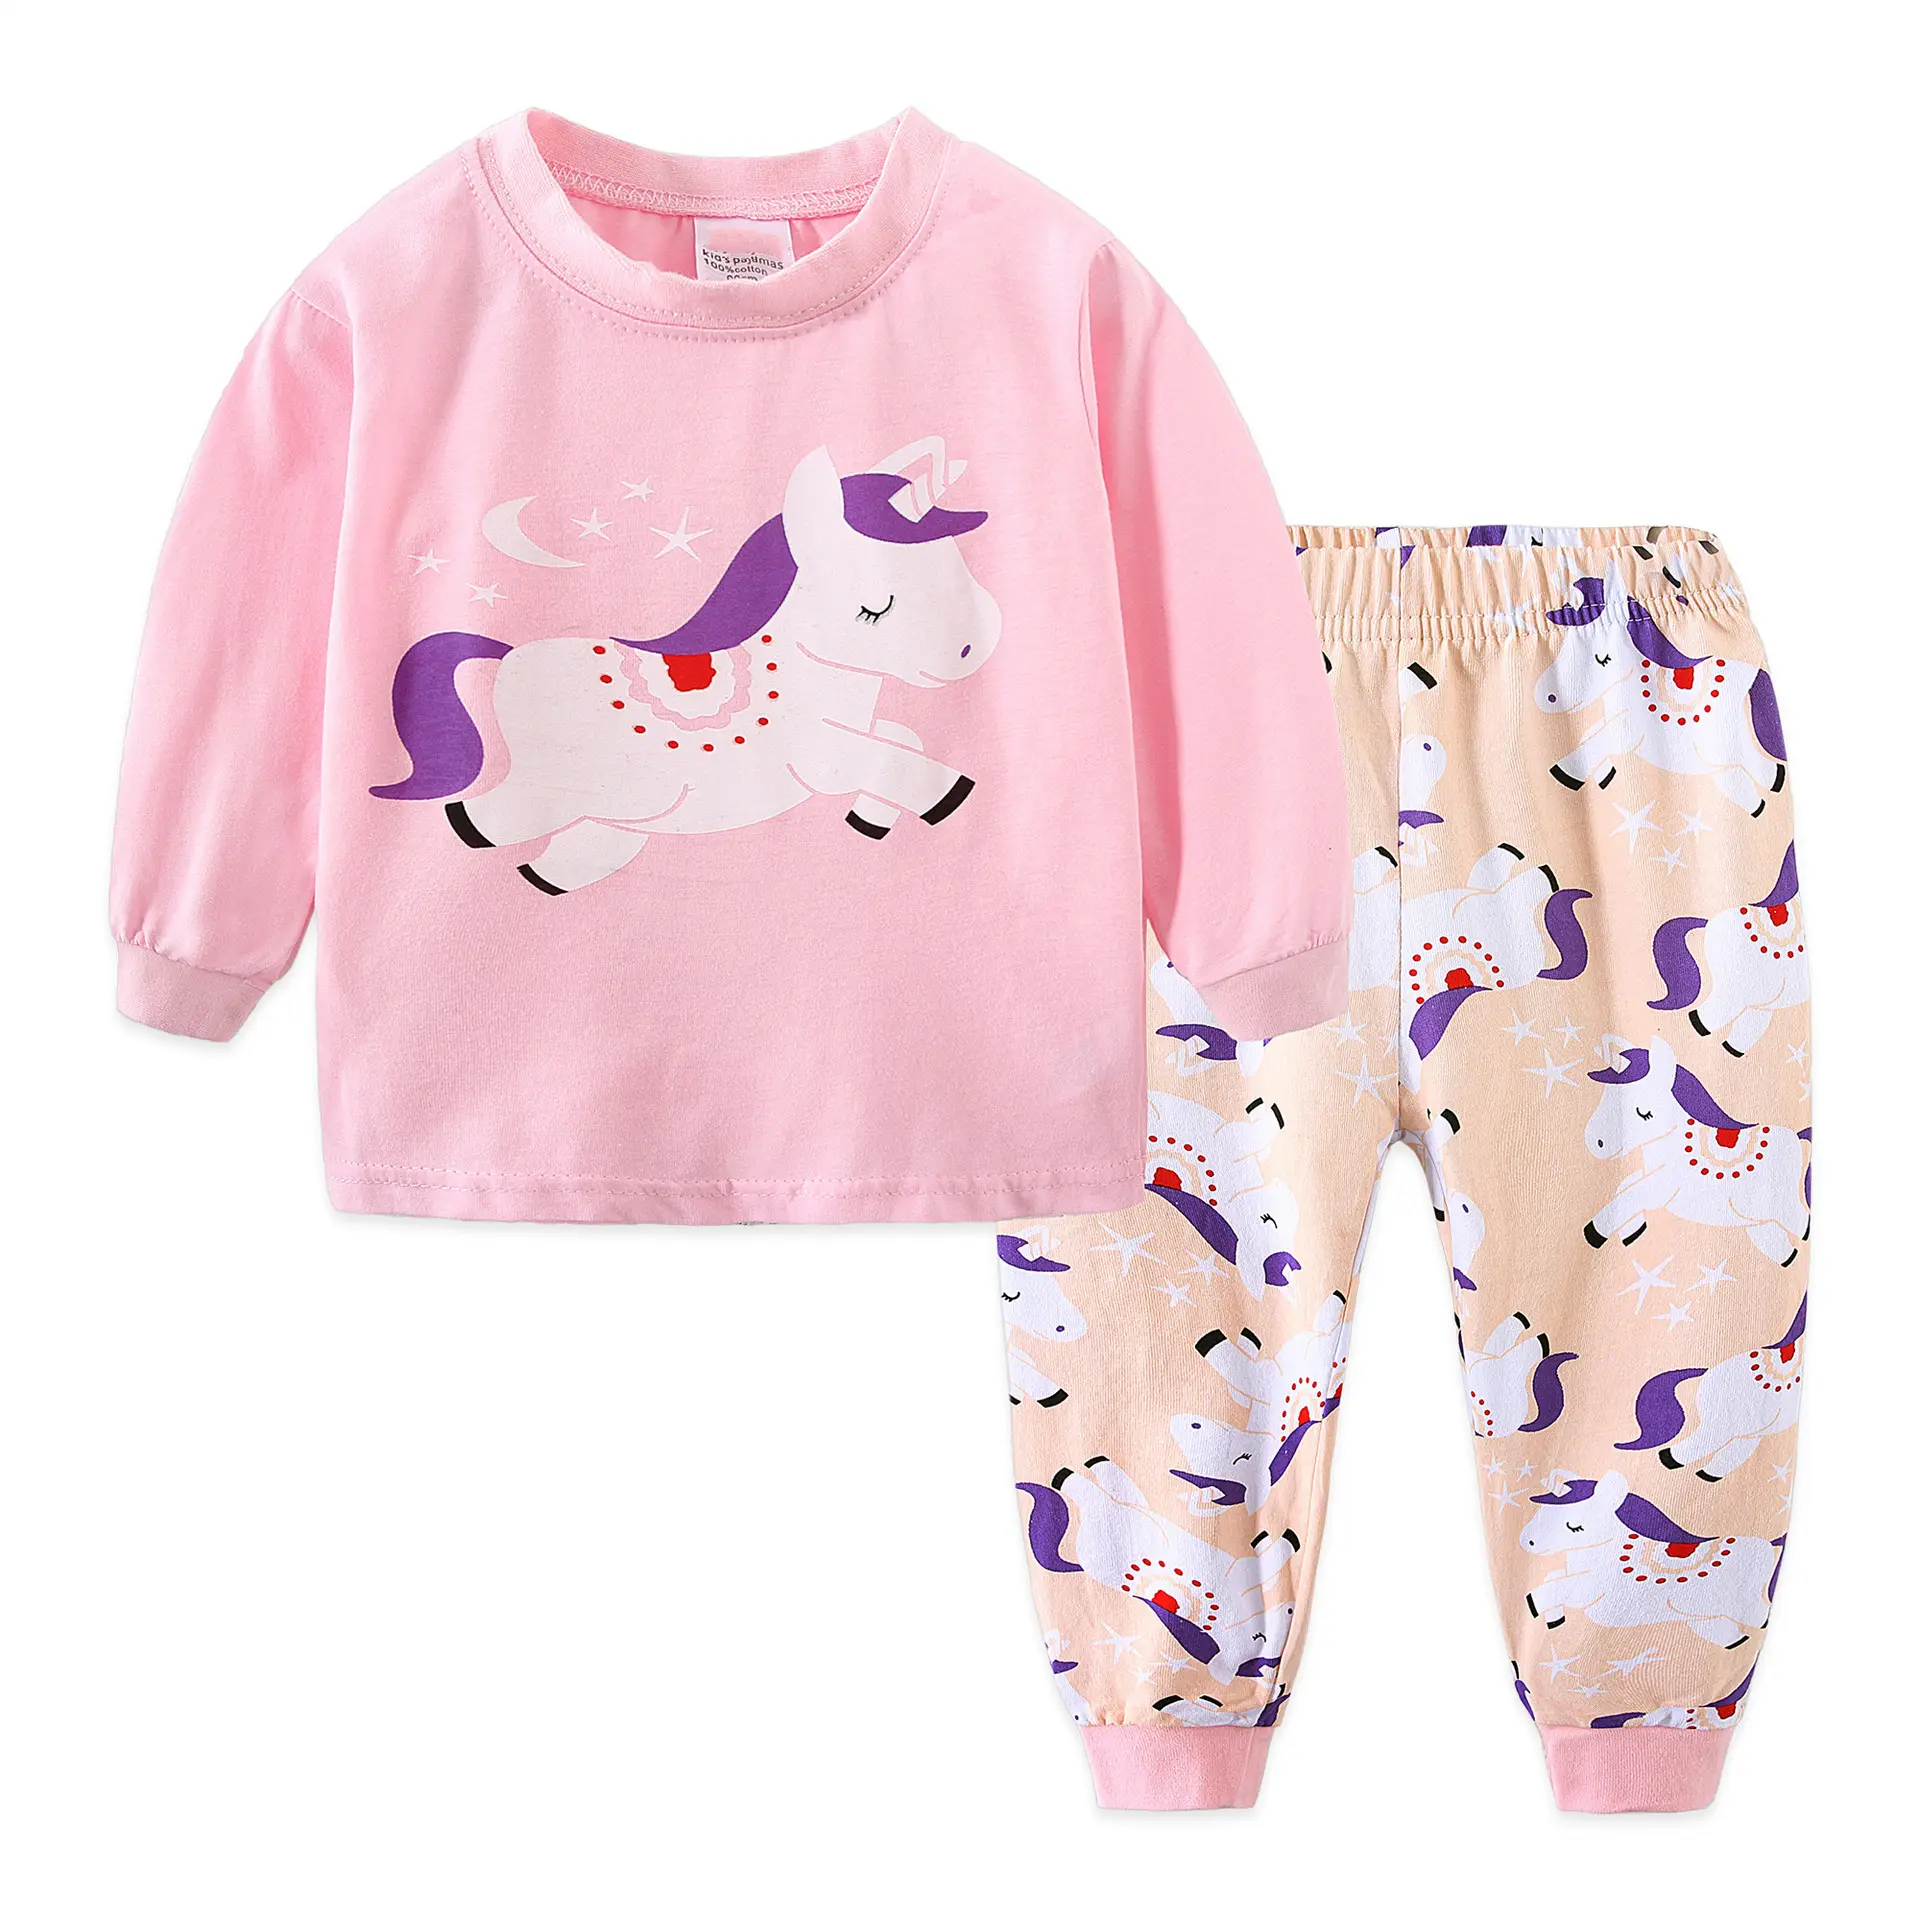 Pink Unicorn Pajamas Indoor for Girls and Boys Suits Children New Inside Umpsuit Fashion Spring and Autumn Cotton OEM Service